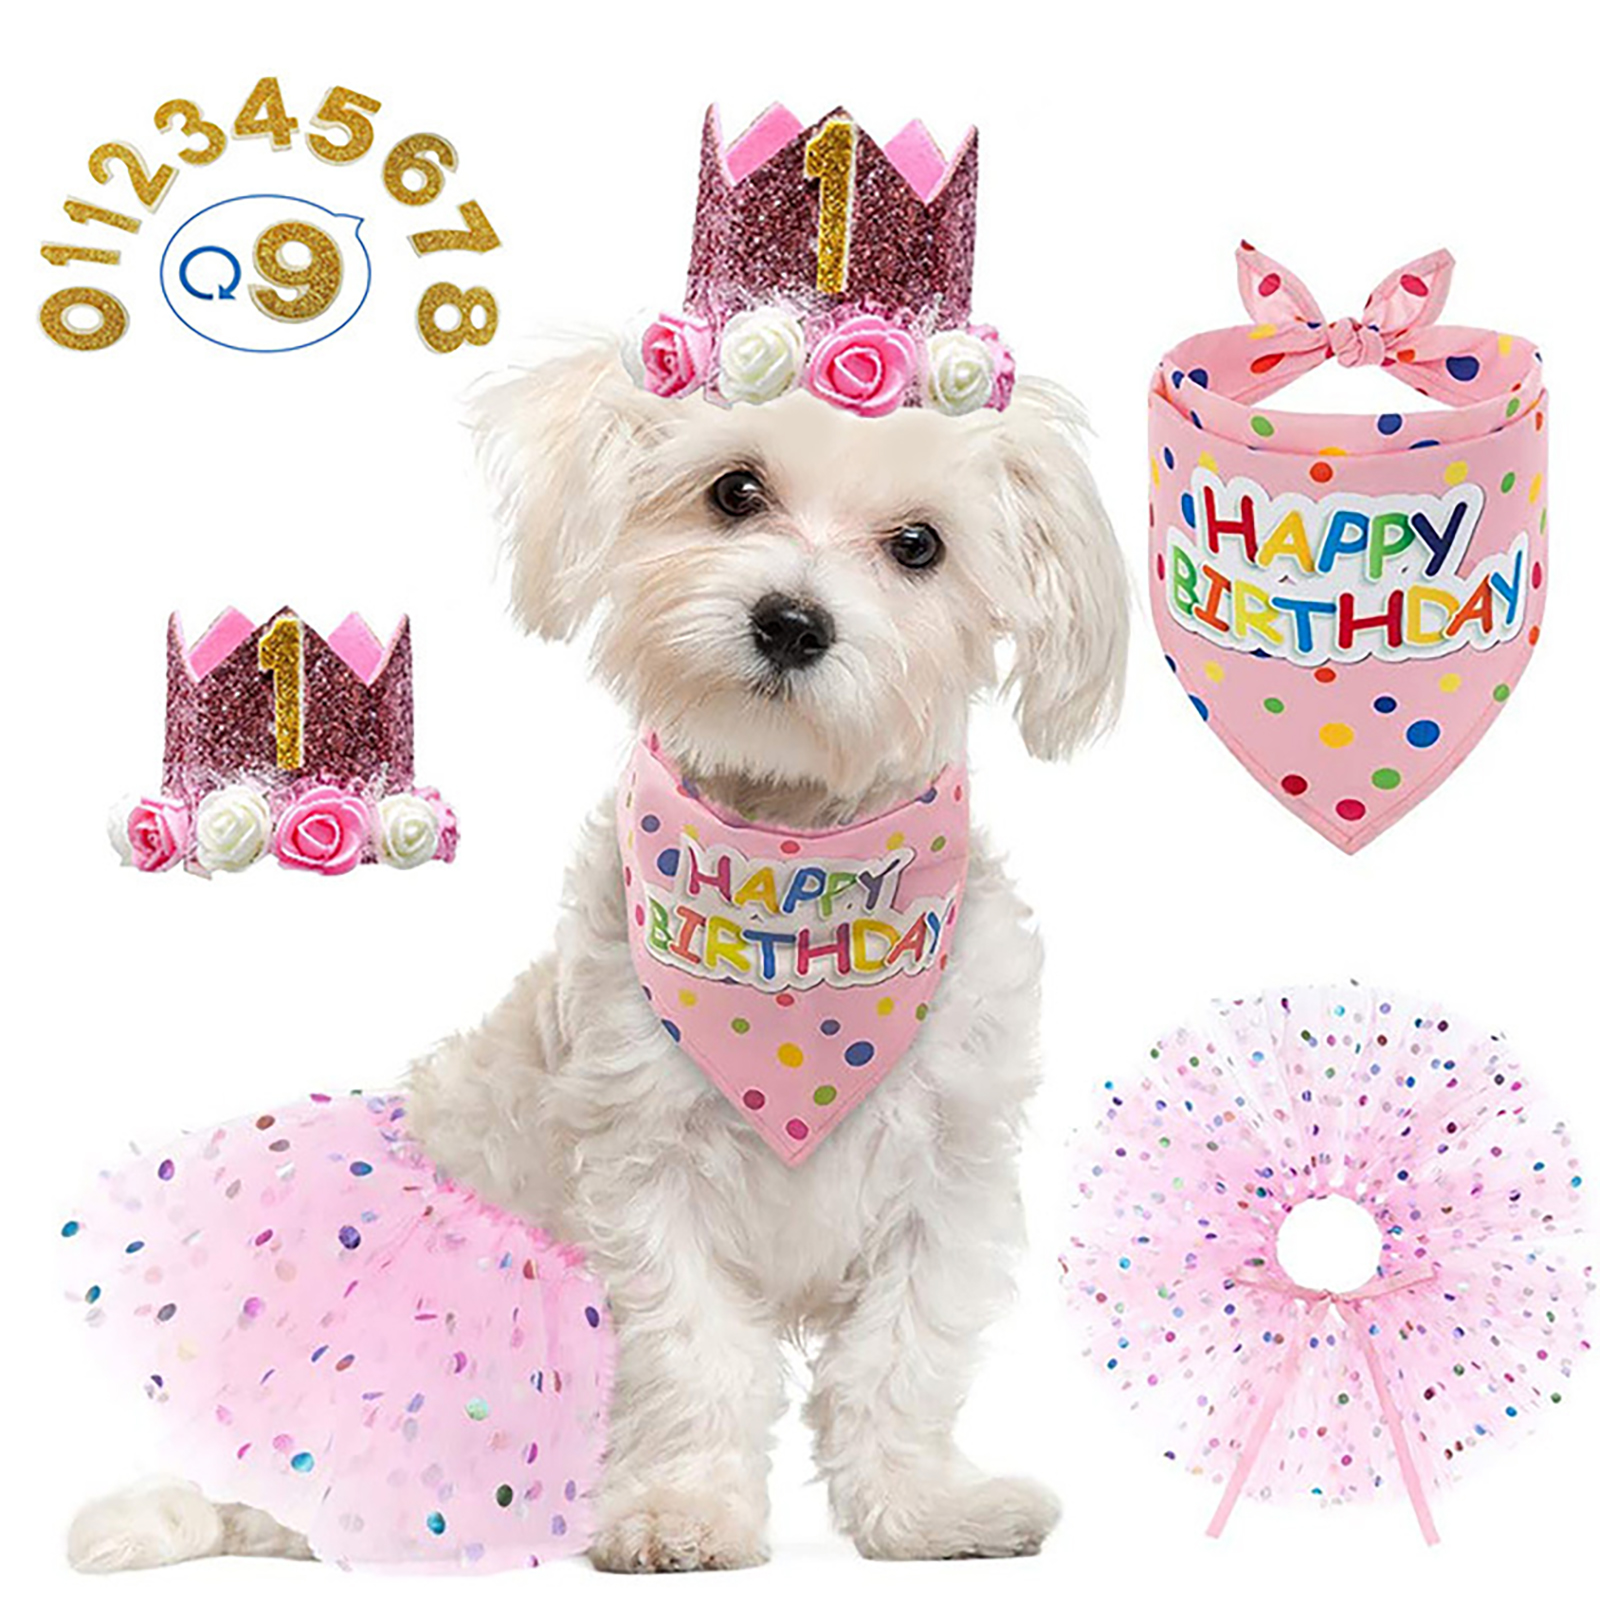 Dog Birthday 1st Party Supplies Scarf Tutu Skirt Crown Hat With 0-8 Numbers Pet Supplies For Puppy Birthday Outfit